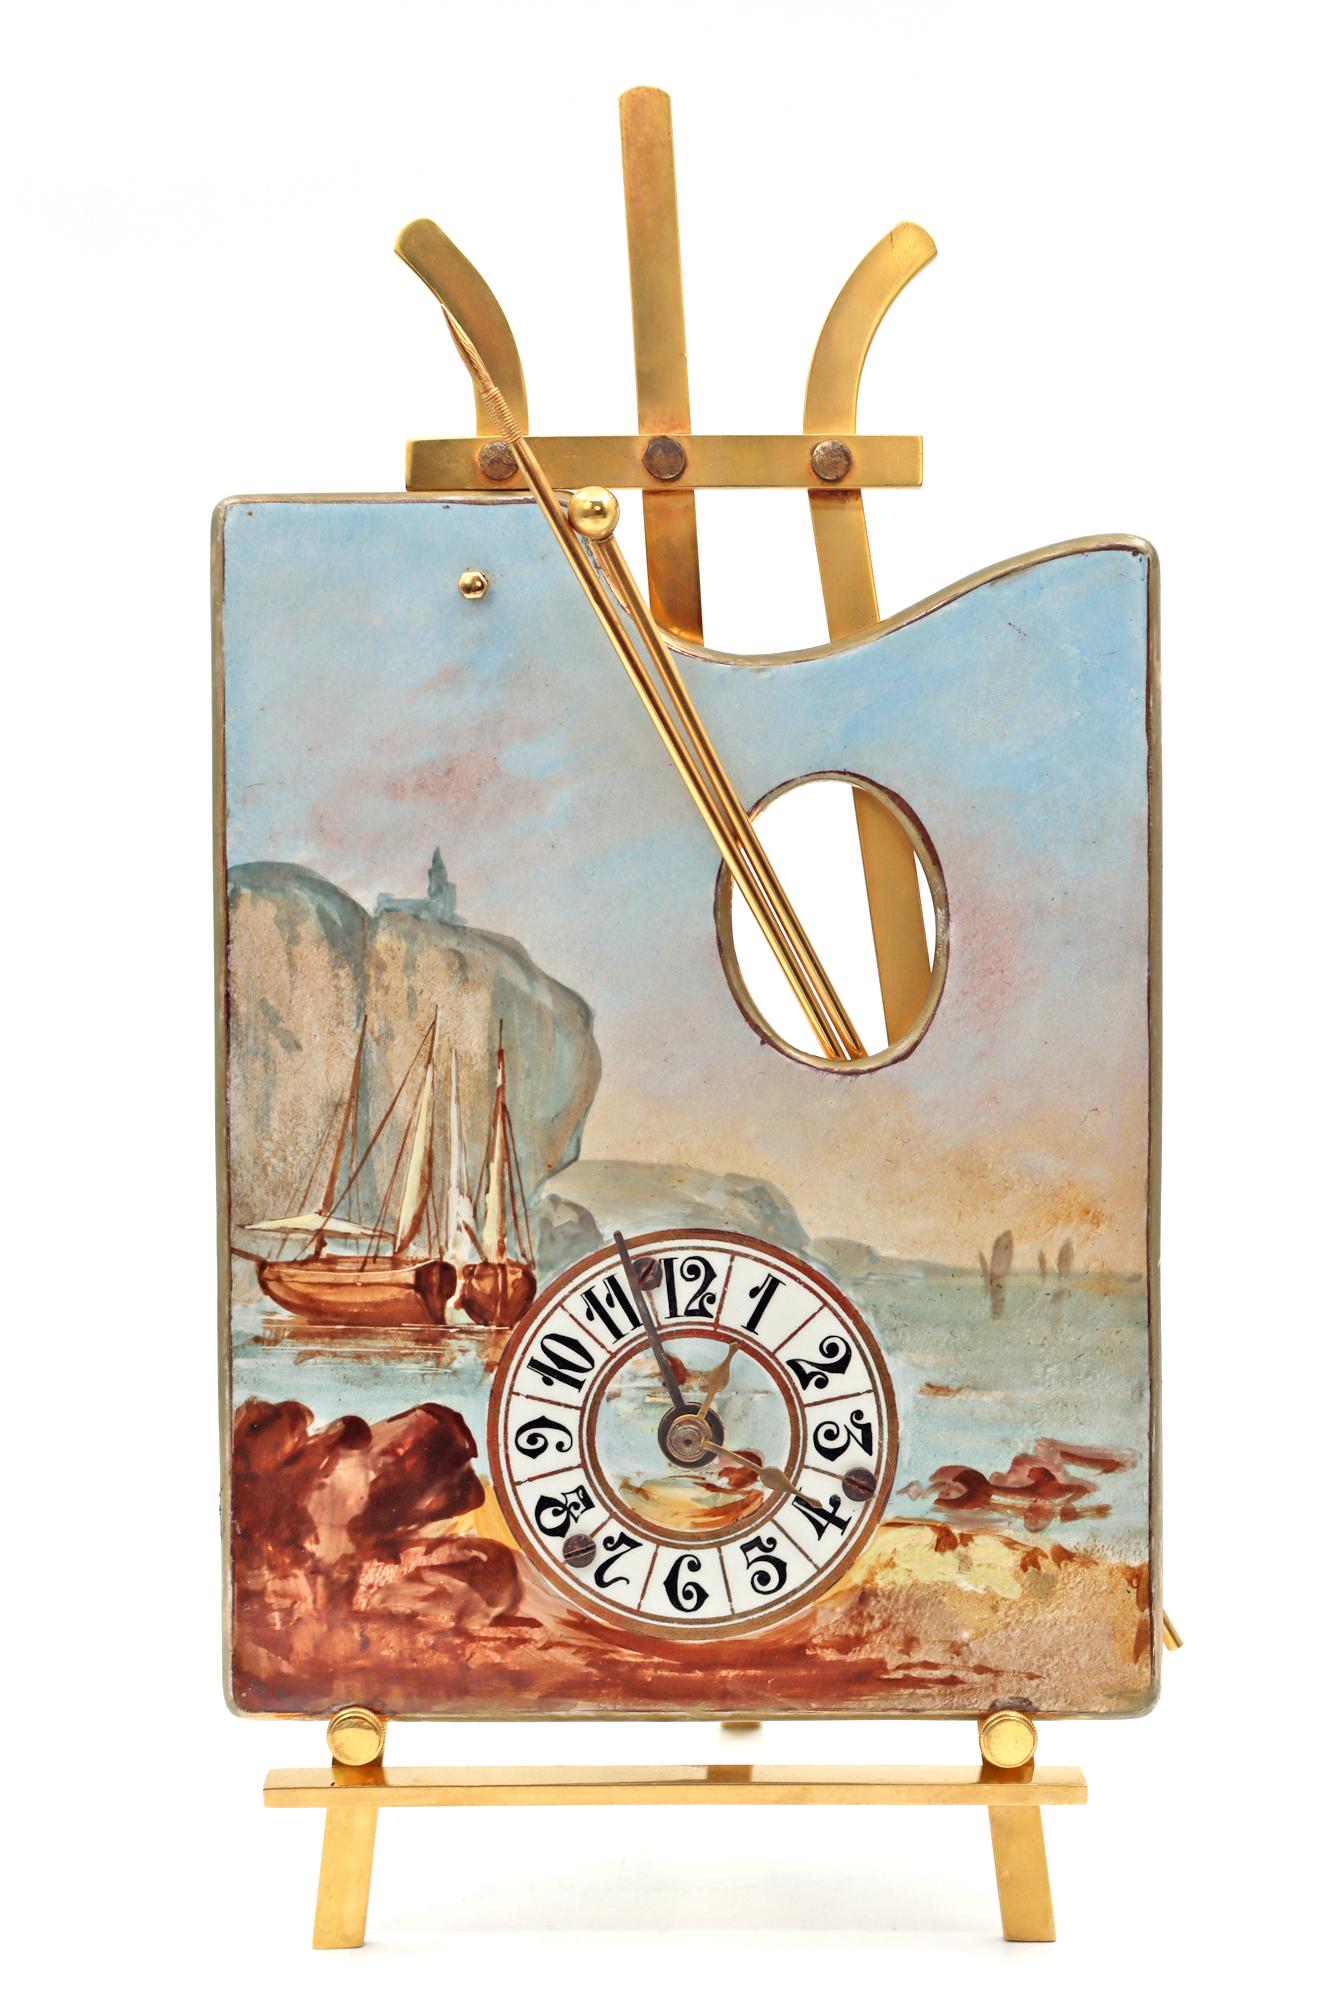 Gilt bronze and painted porcelain clock in the form of an easel, early 19th century.